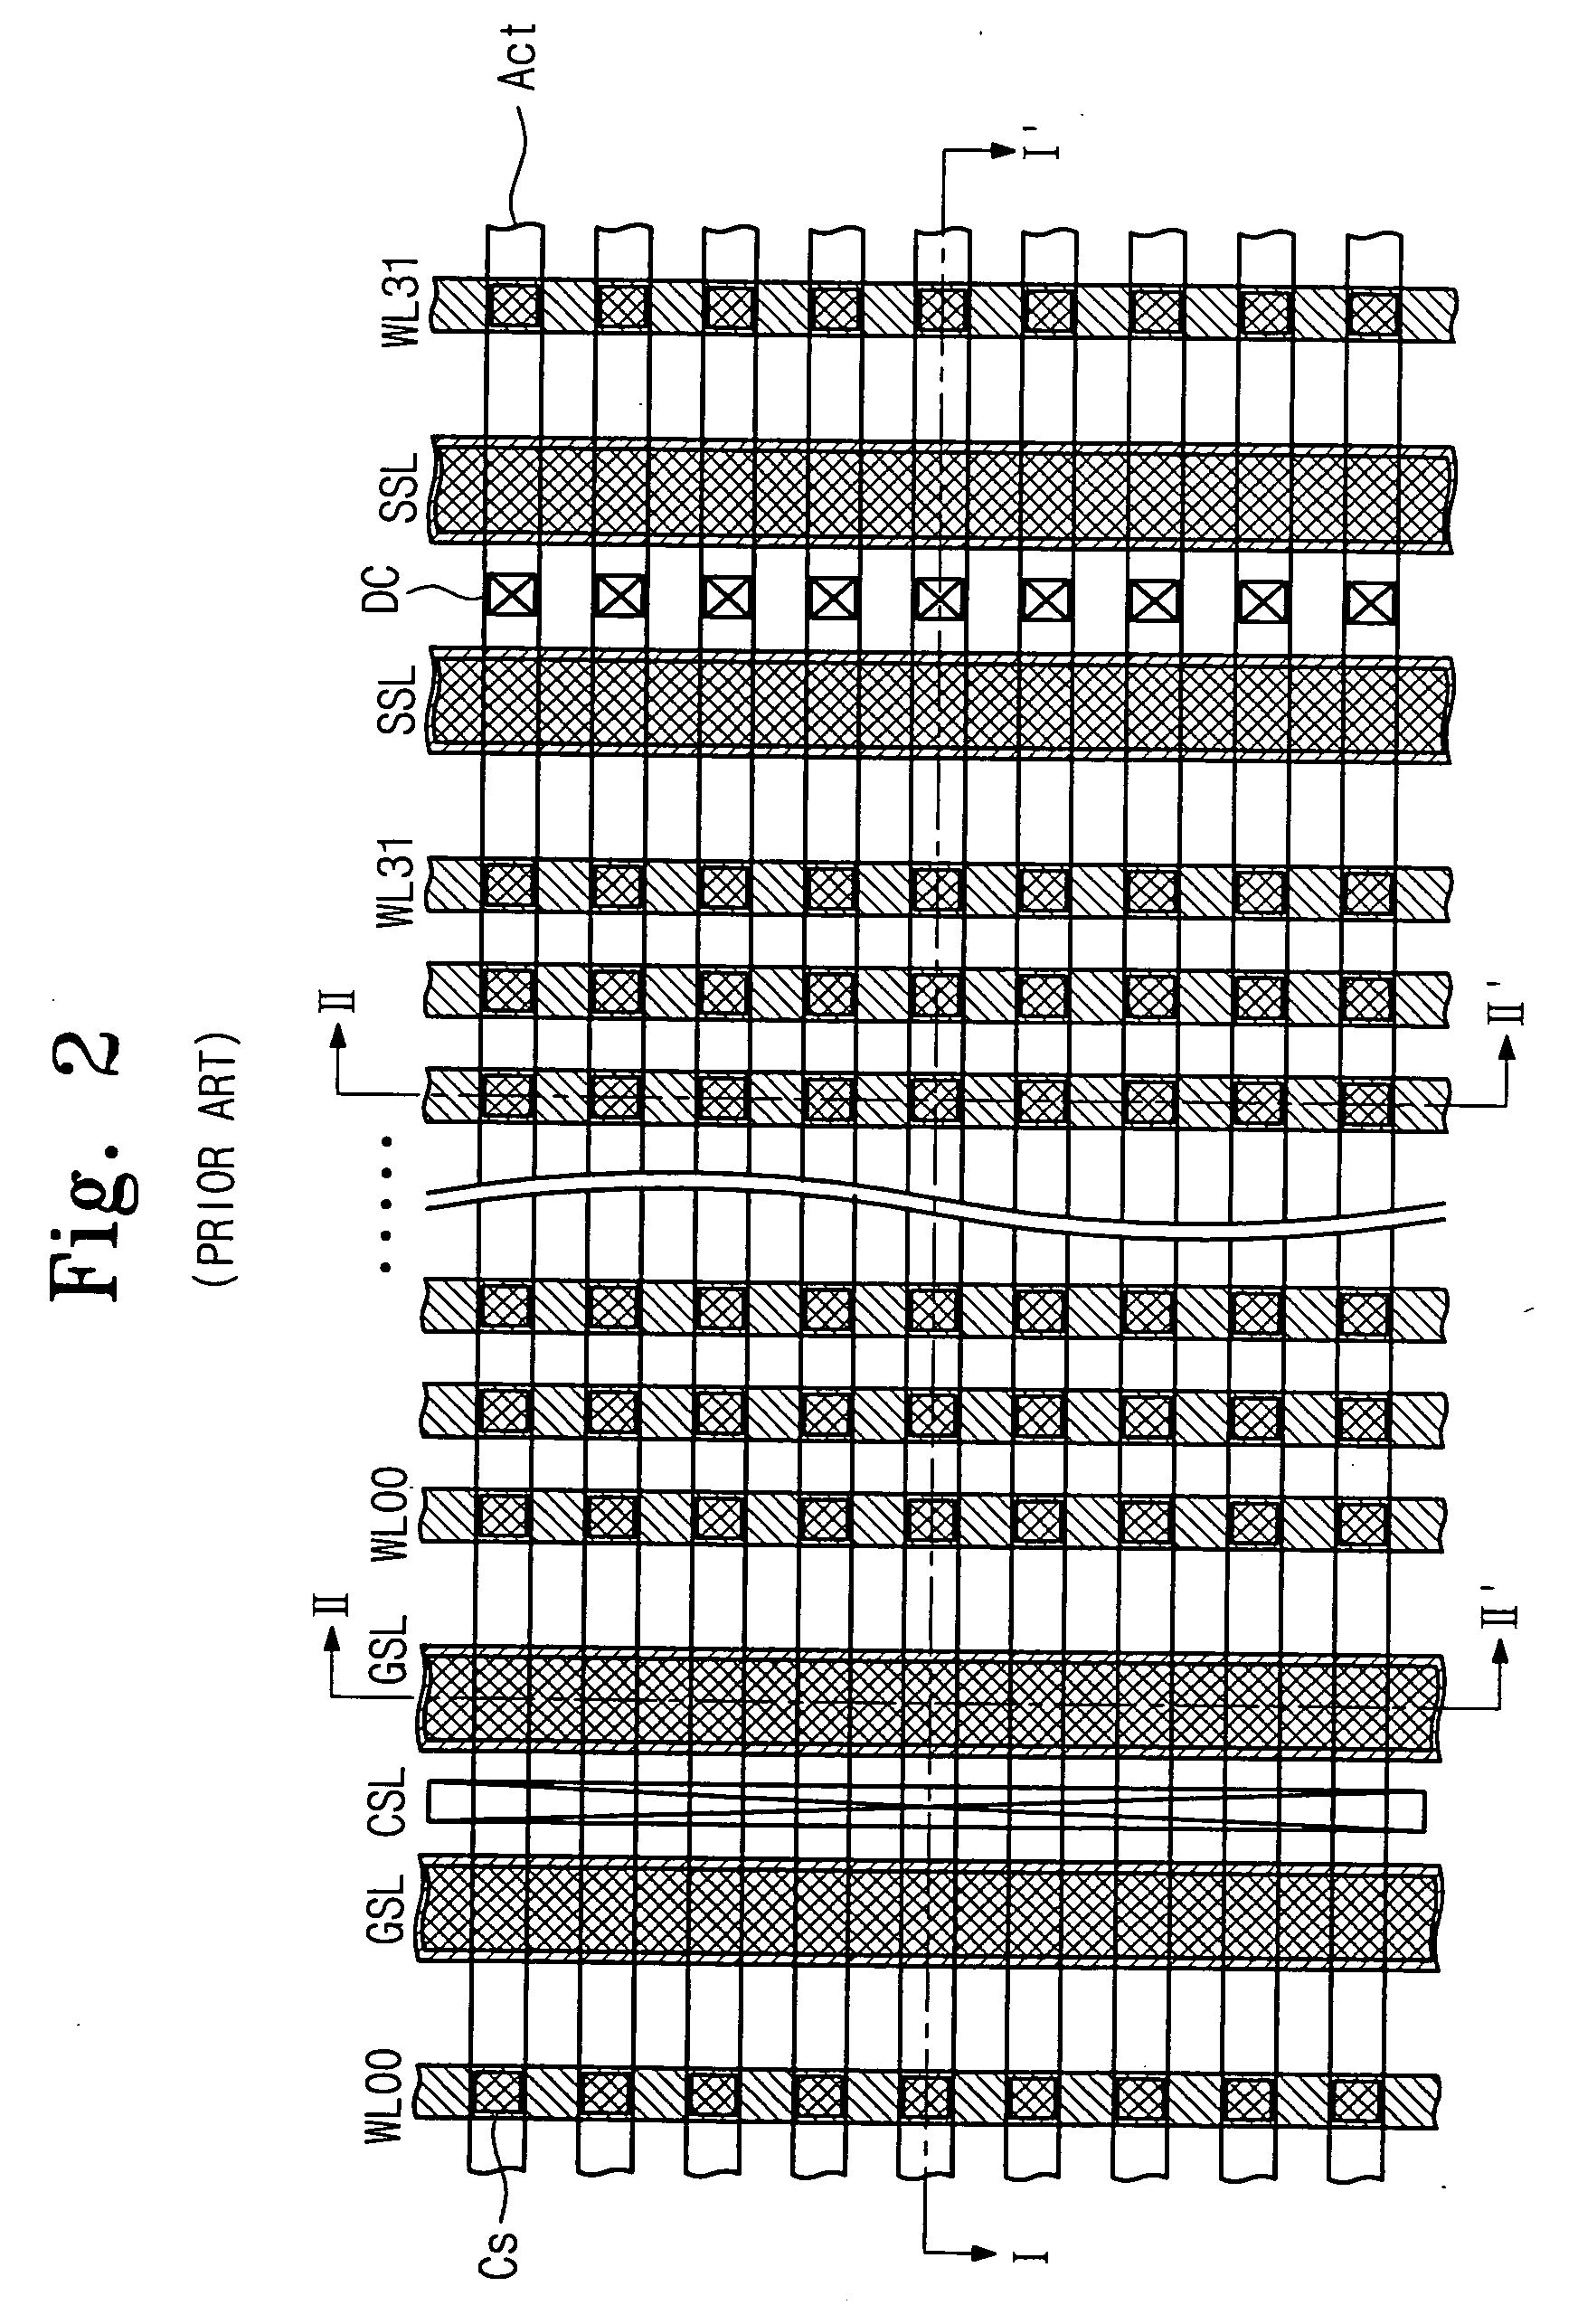 Multi-layer nonvolatile memory devices and methods of fabricating the same